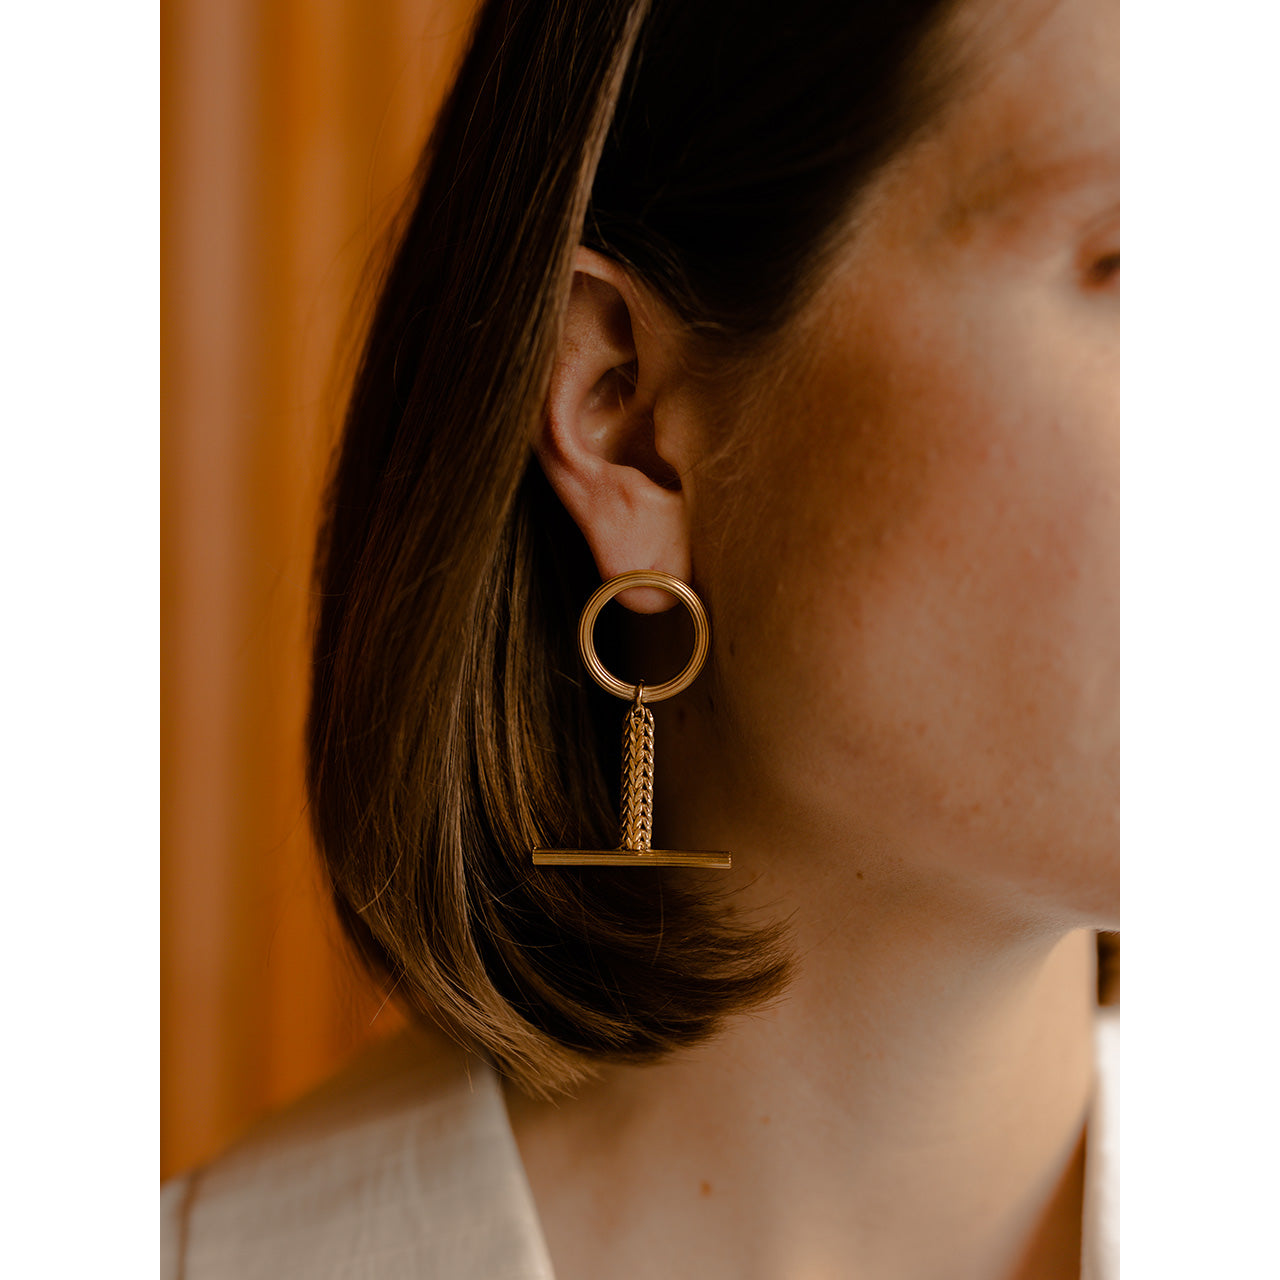 The Carve earrings playfully pay homage to our iconic Carve bracelet, offering a delightful nod in a shorter form.